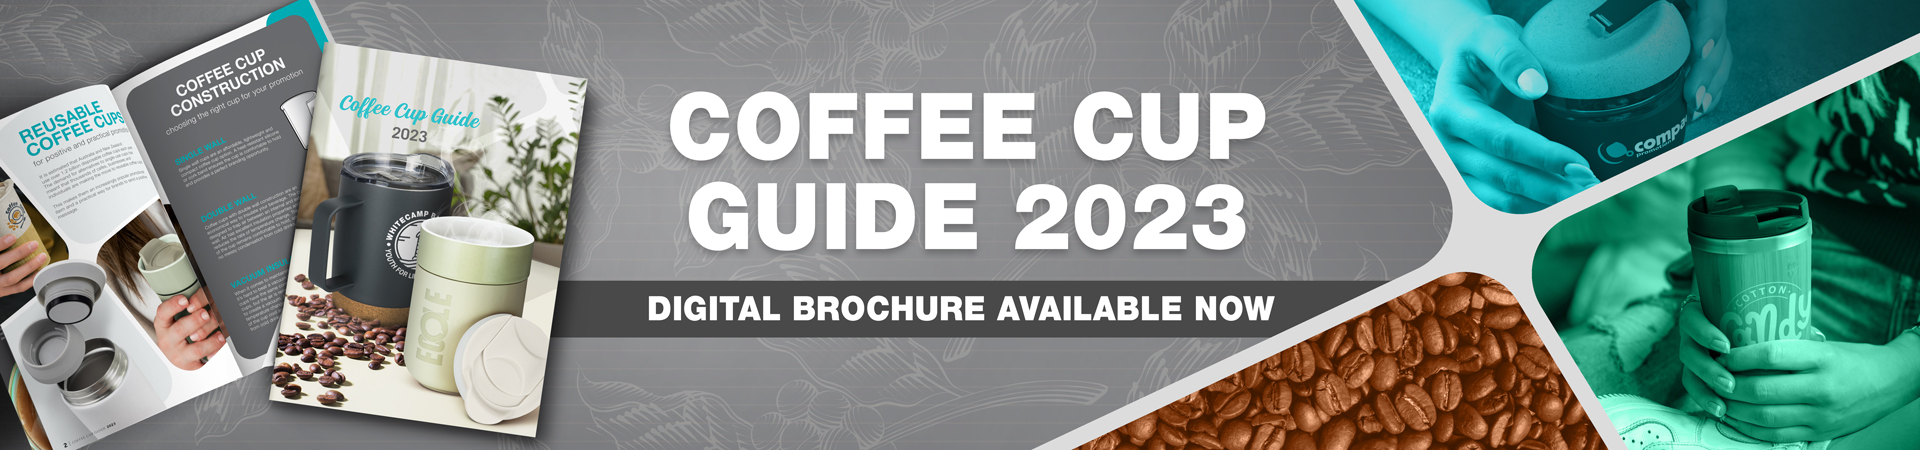 Coffee Cup Guide 2023